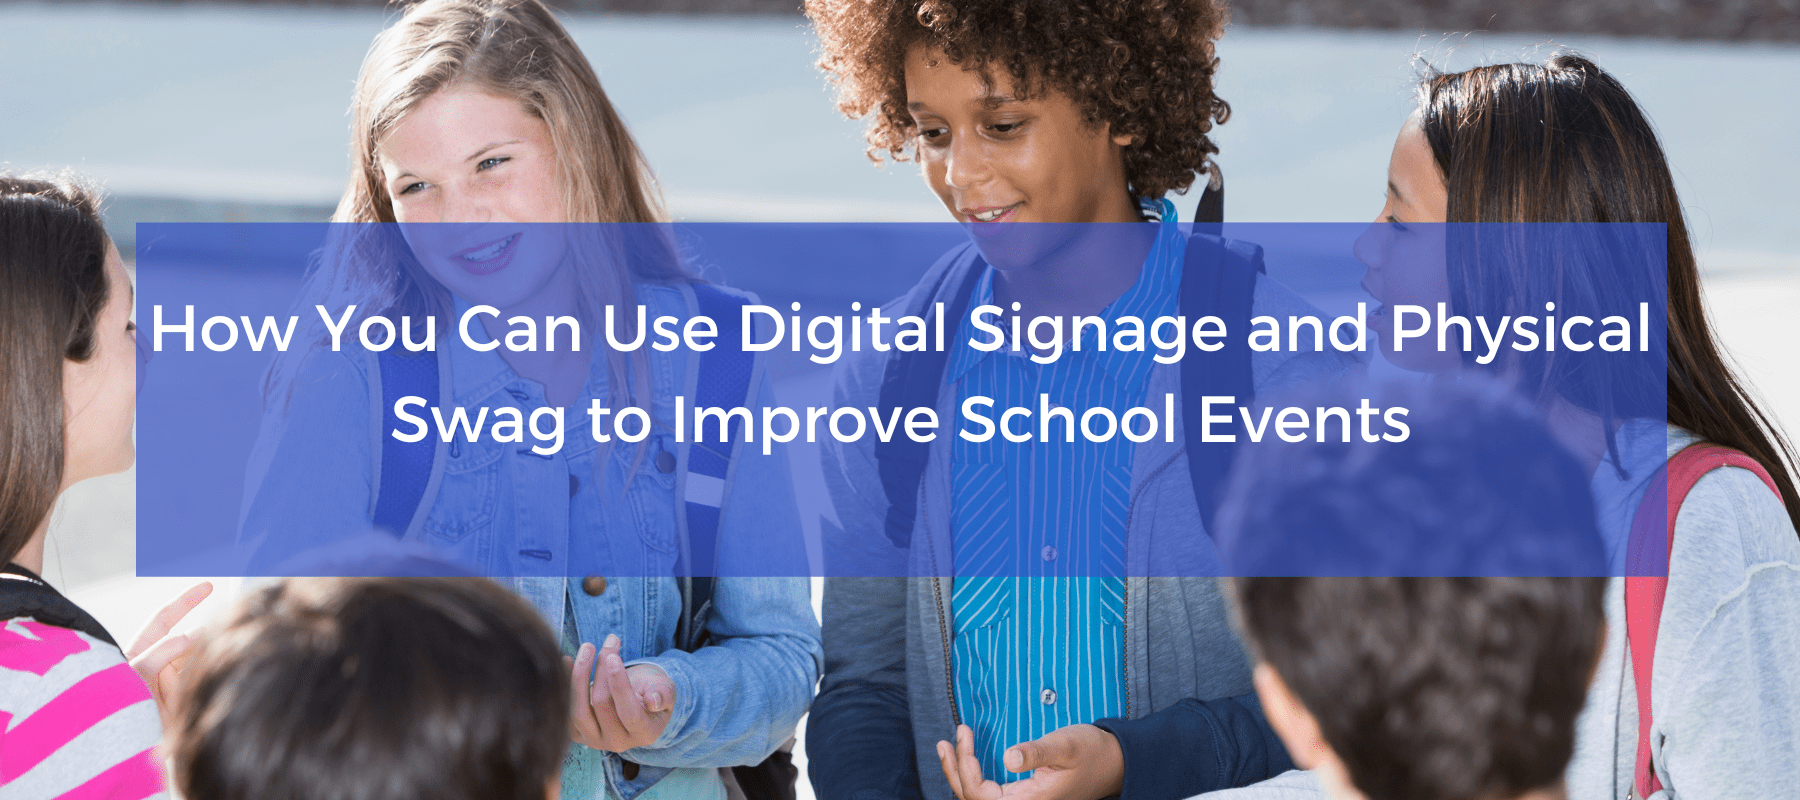 How You Can Use Digital Signage and Physical Swag to Improve School Events